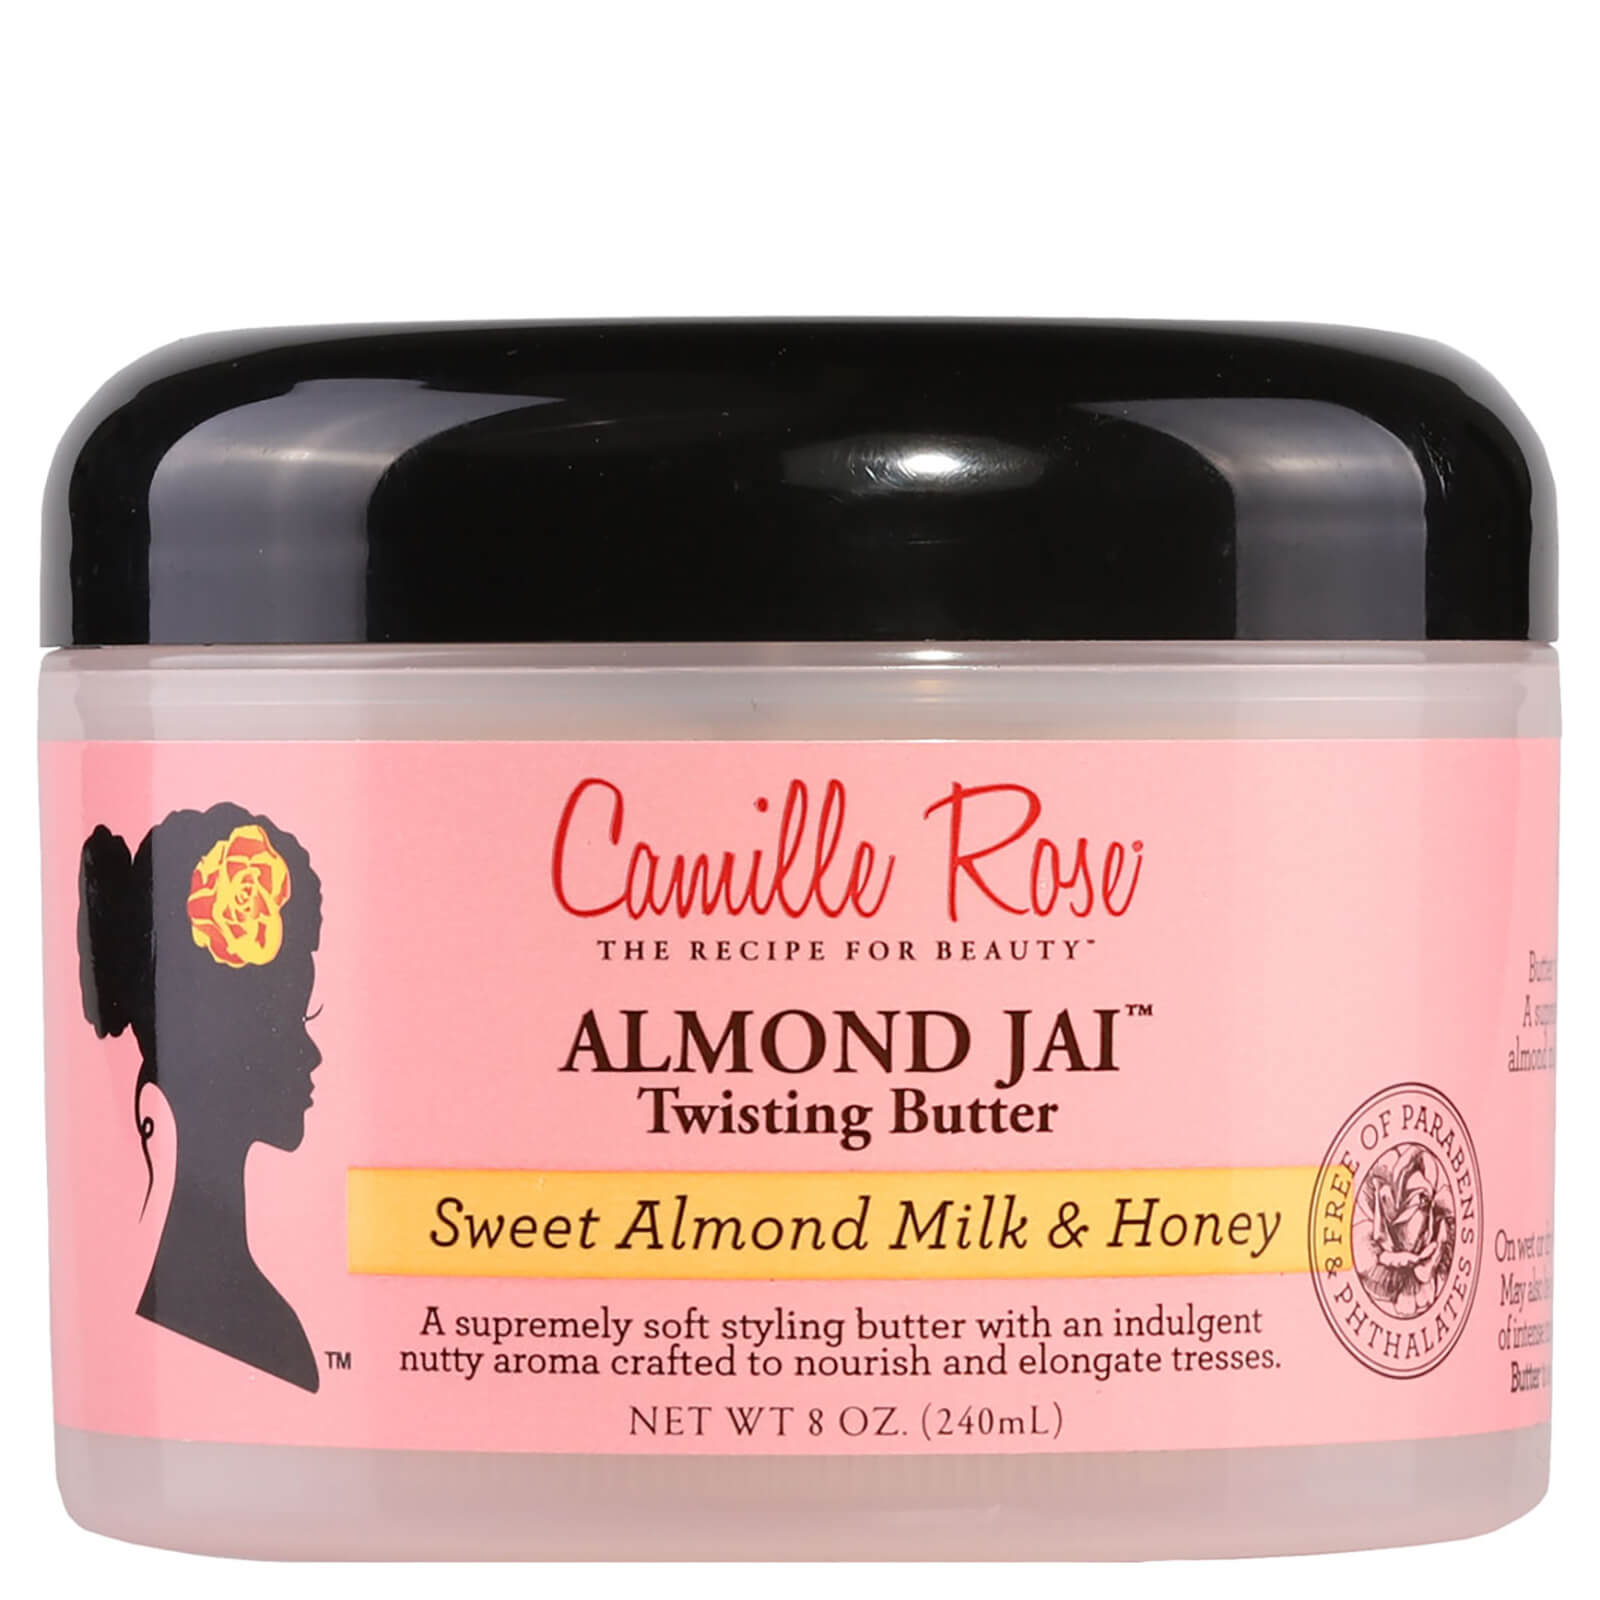 Image of Camille Rose Almond Jai Twisting Butter 240ml